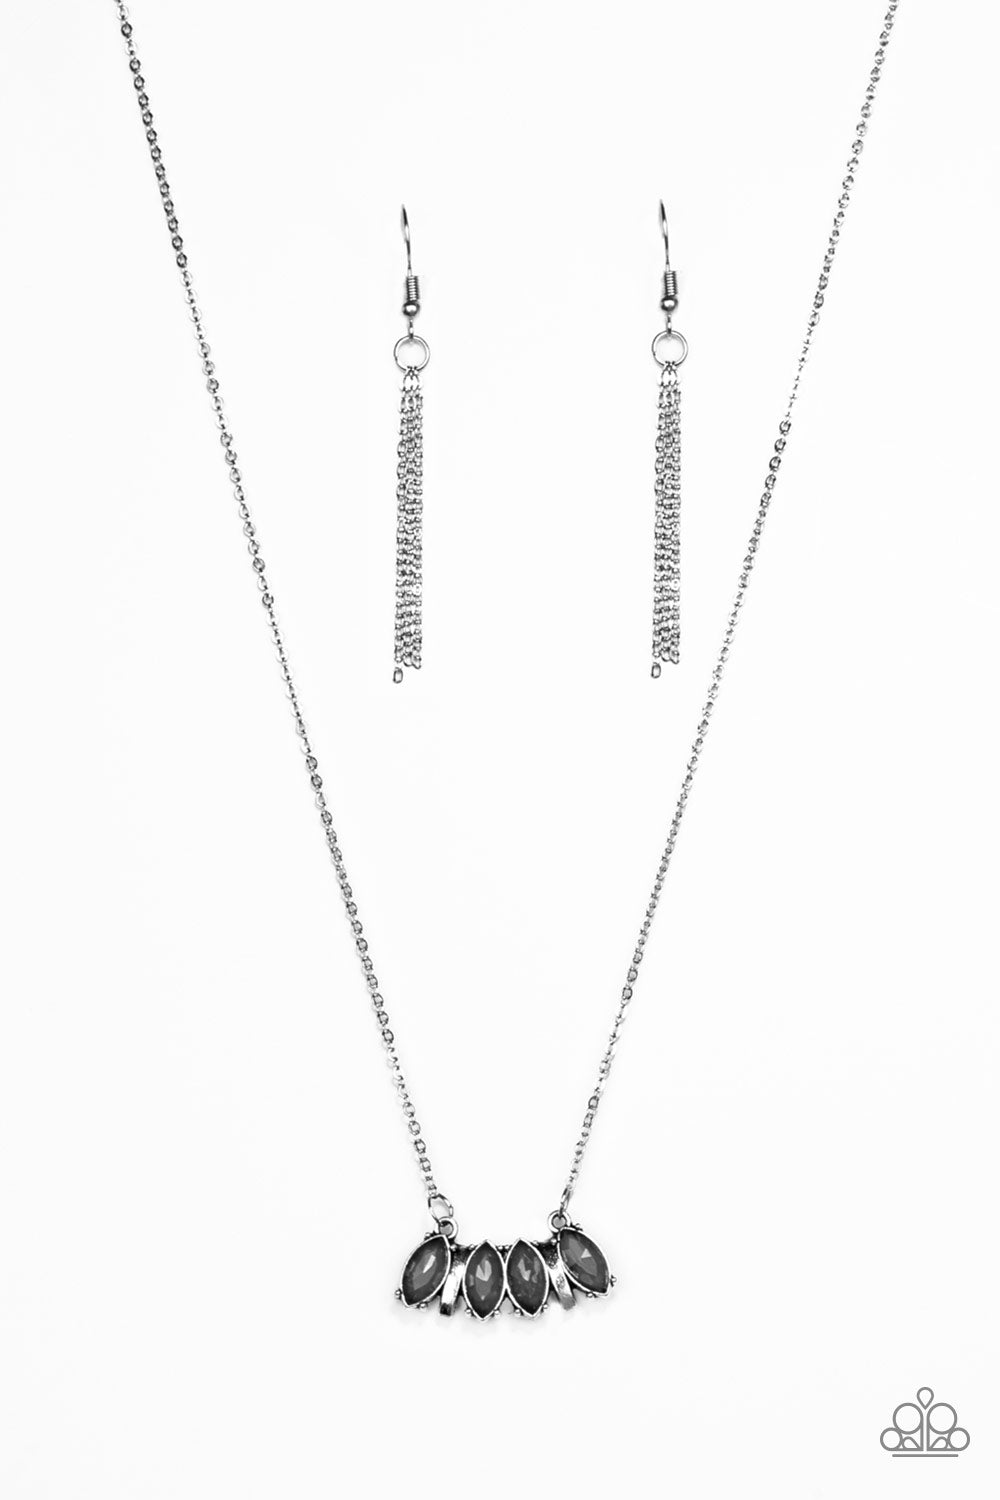 Paparazzi - Deco Decadence - Silver Necklace & Earrings